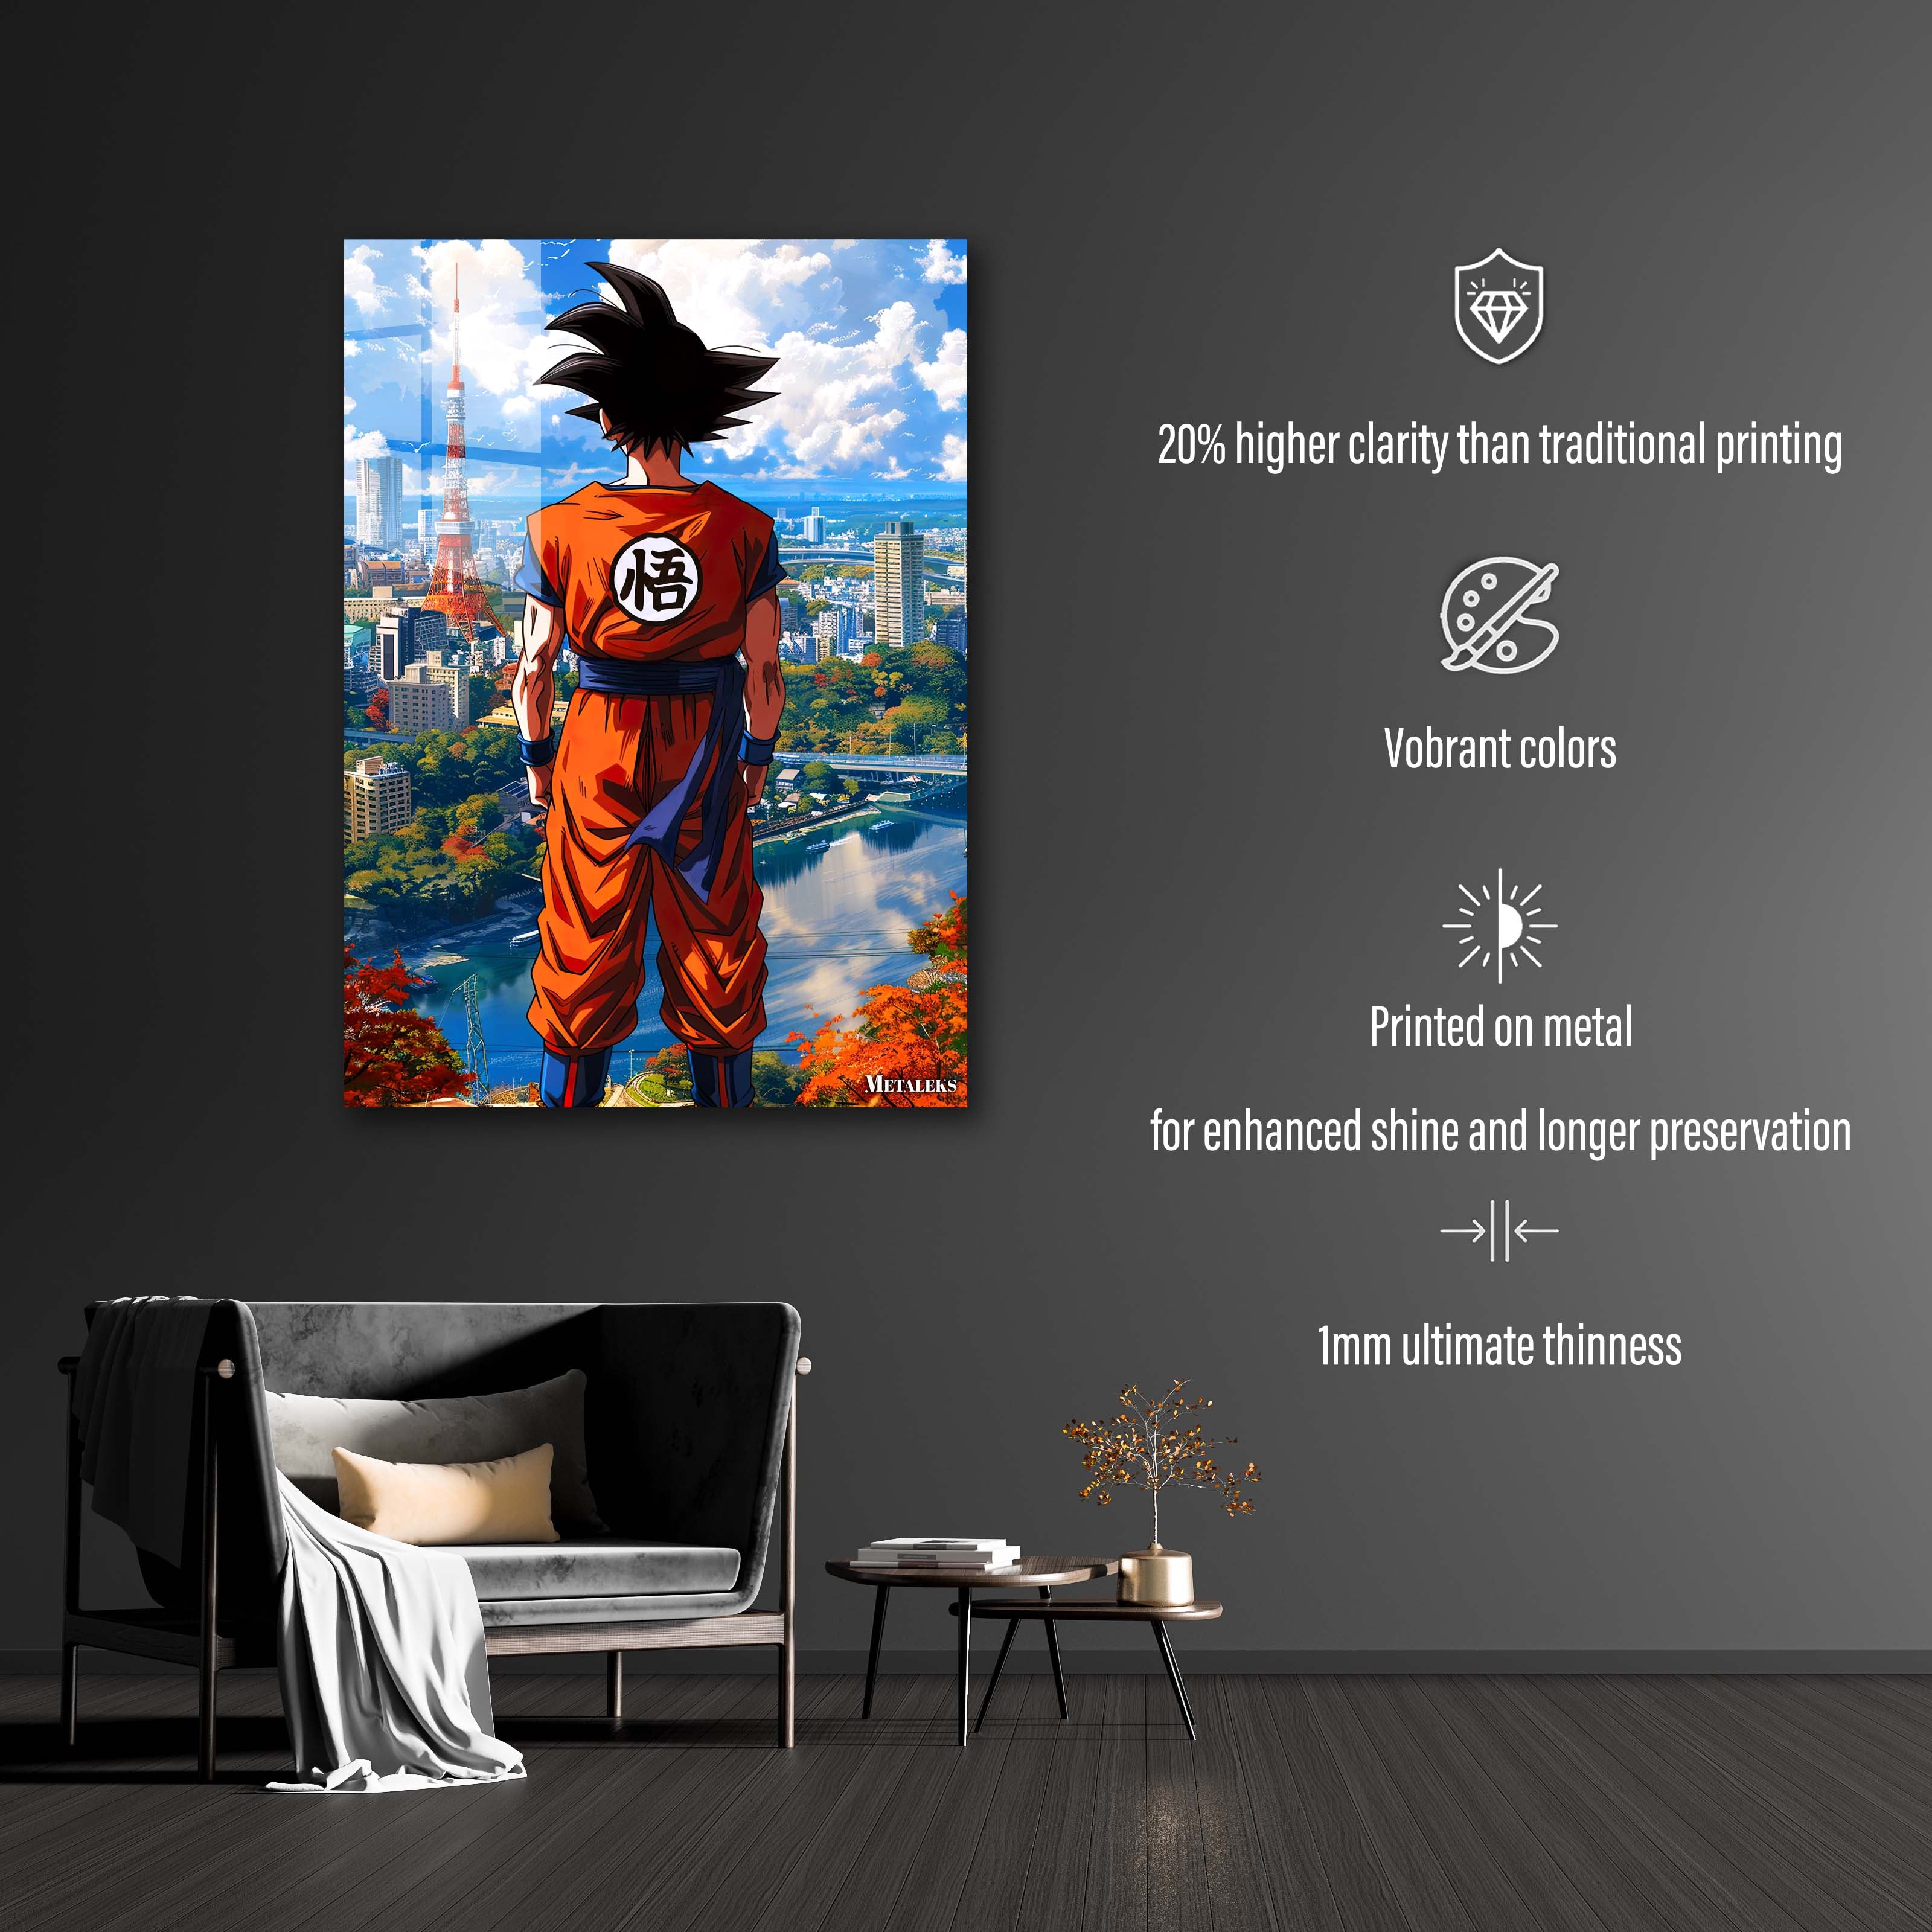 GOKU 2 anothermidjourney-designed by @An other Mid journey